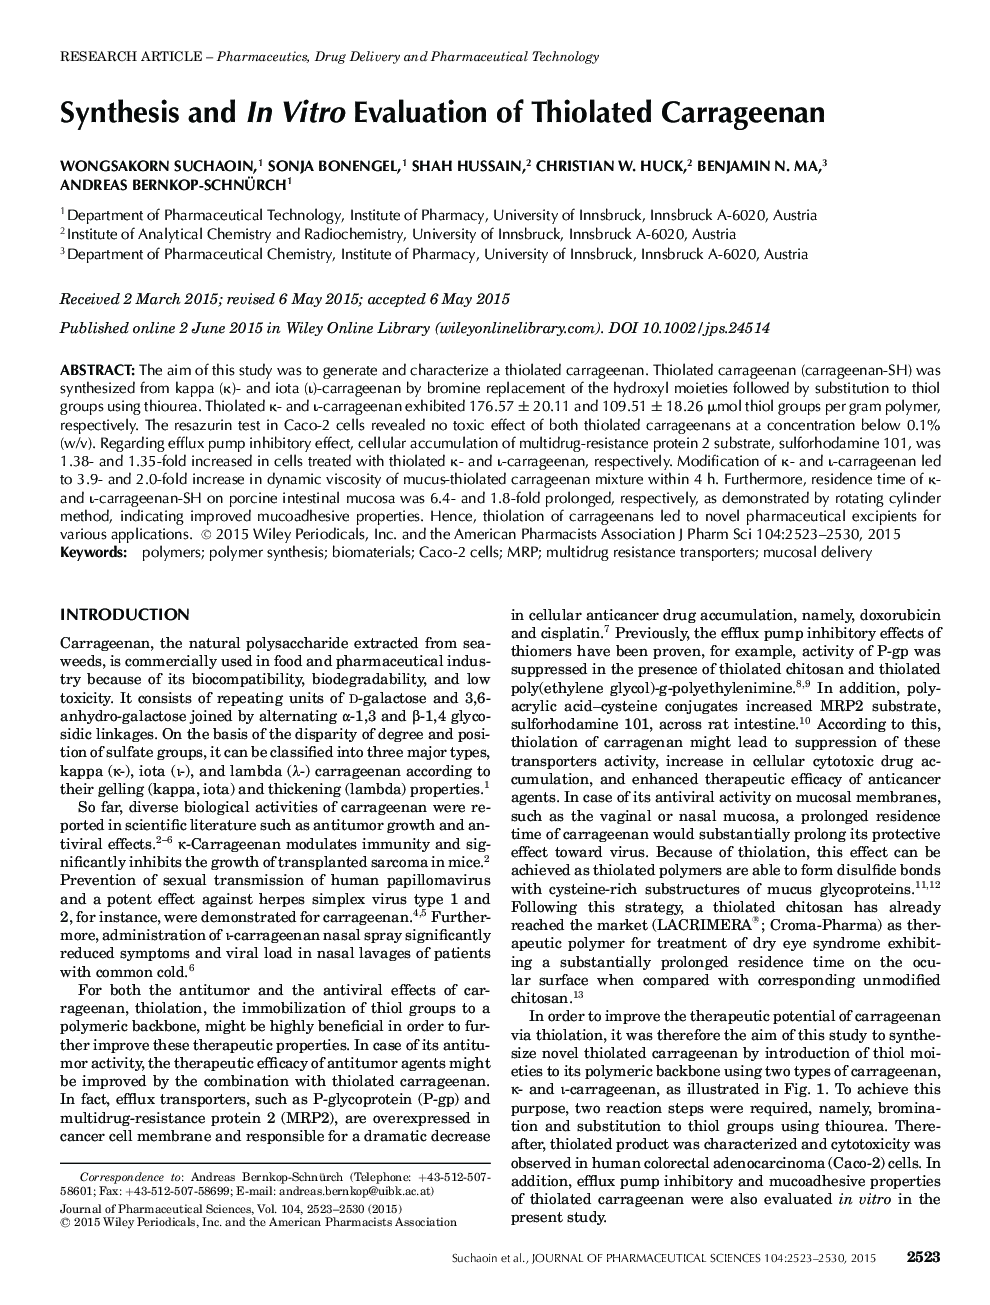 Synthesis and In Vitro Evaluation of Thiolated Carrageenan